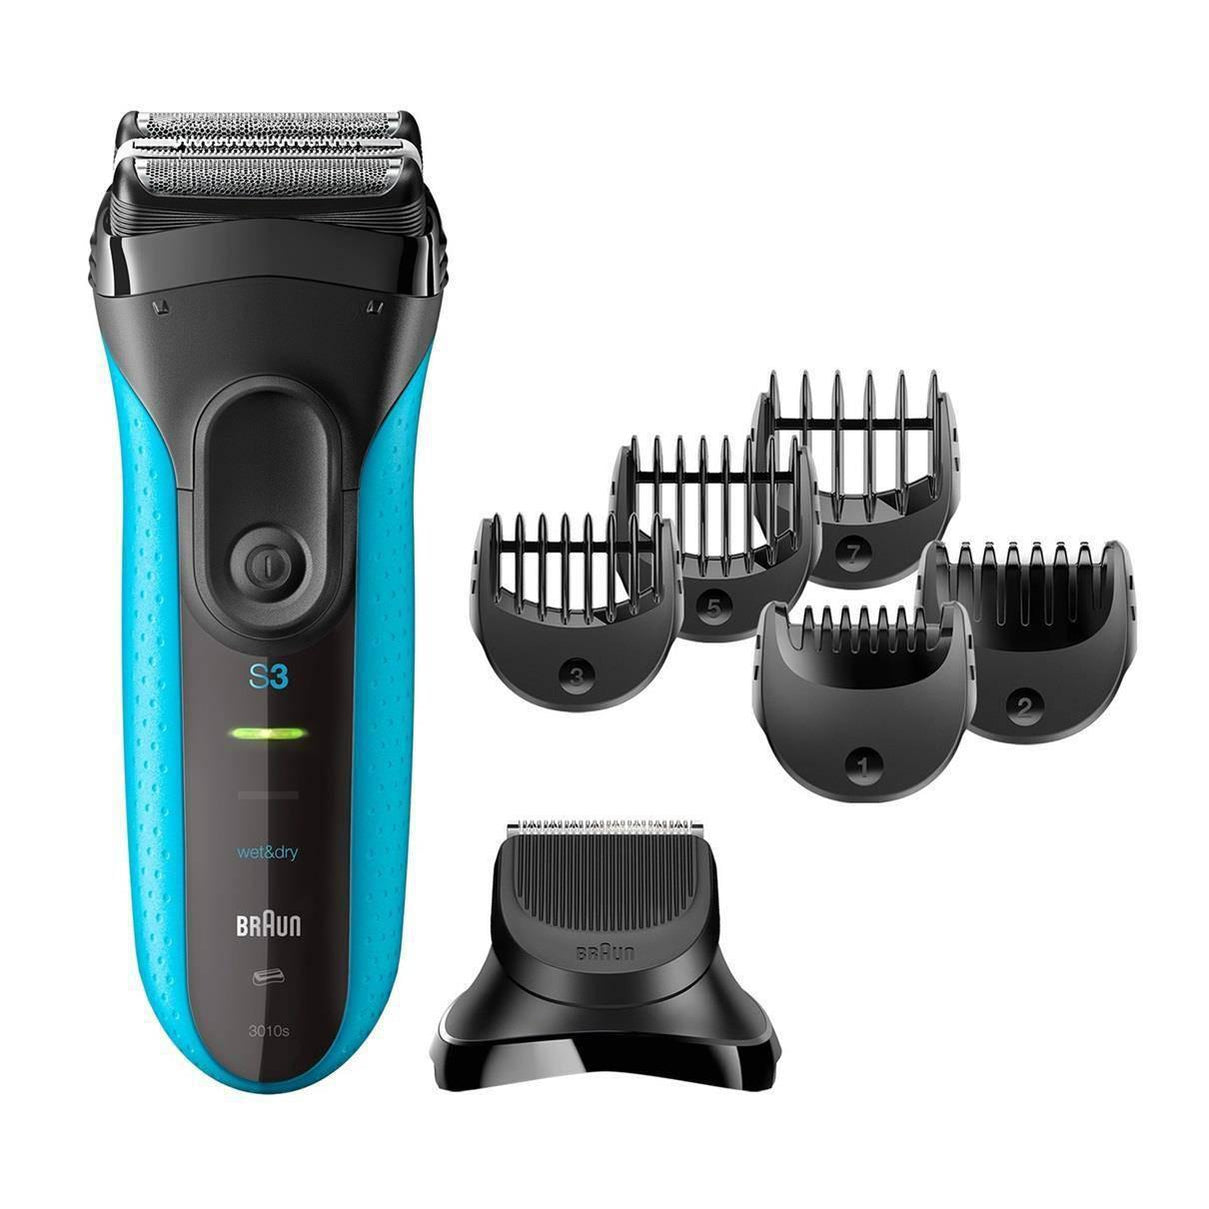 Braun Series 3 Shave & Style 3010BT 3-in-1 Electric Shaver with Precision Trimmer - Healthxpress.ie